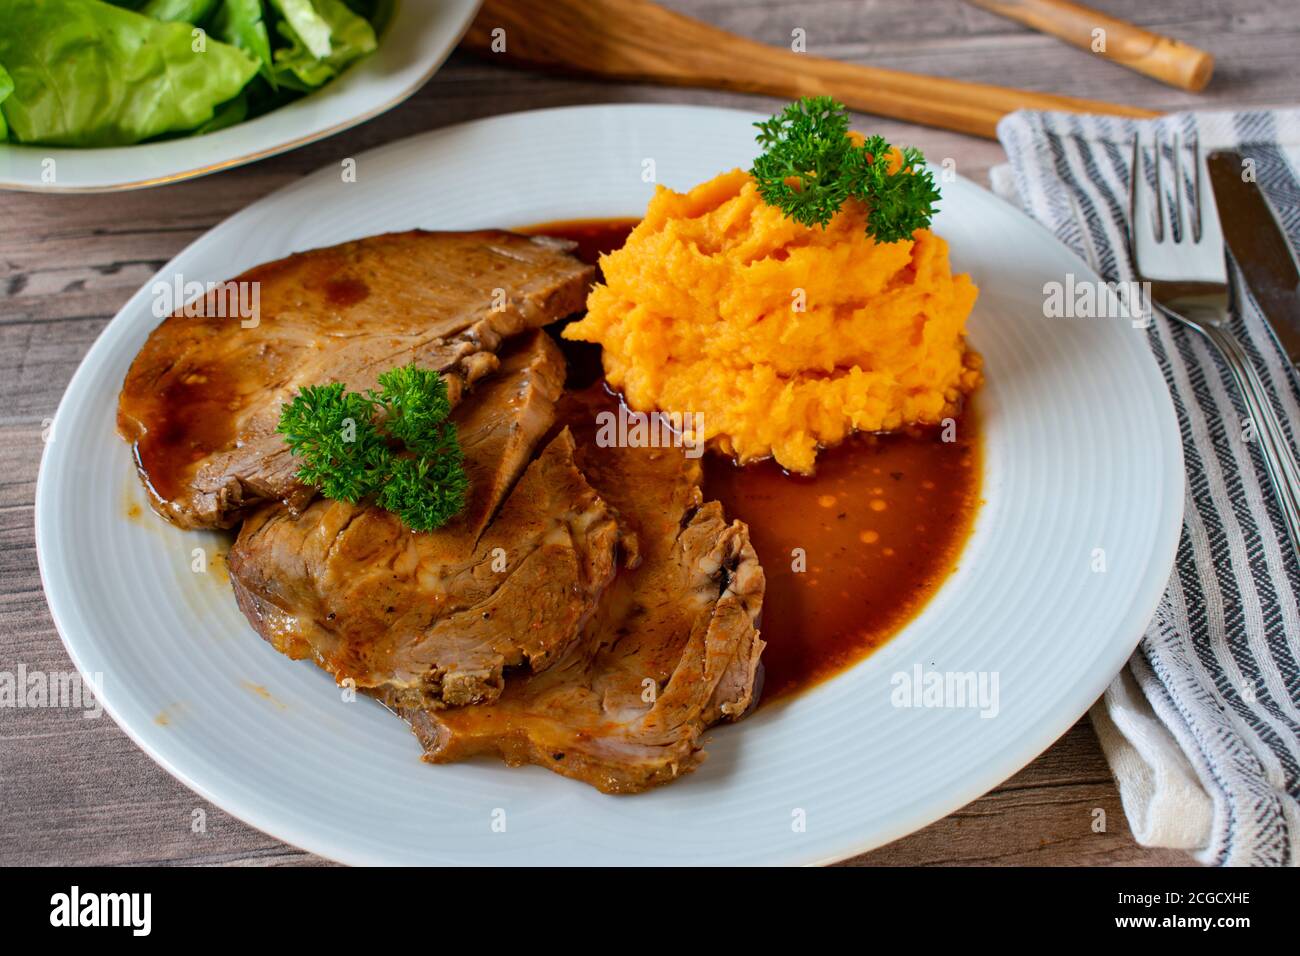 Roast pork with mashed potatoes and gravy Stock Photo